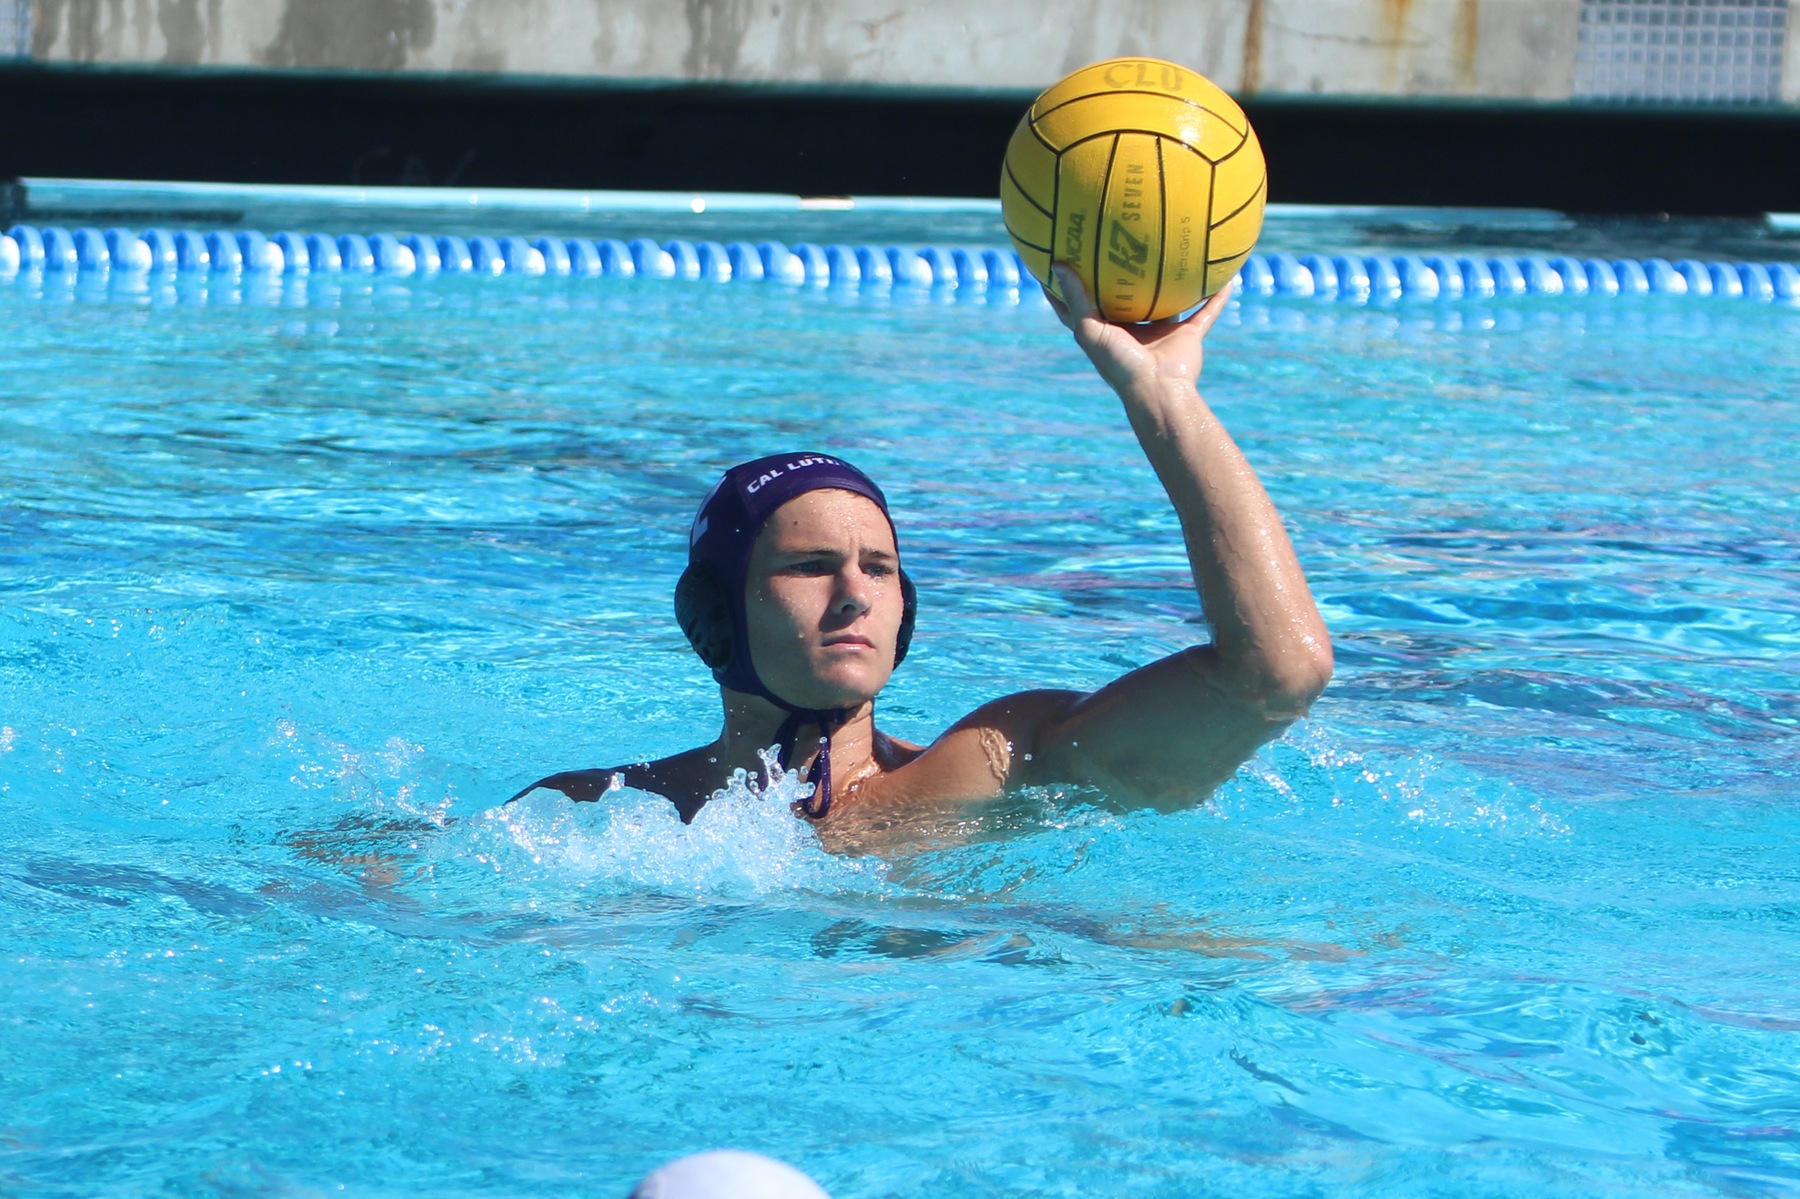 Justin Krause (pictured) and Ben Brown both scored a hat trick to lead CLU past ULV 11-7. (Photo :Claire Caldera)